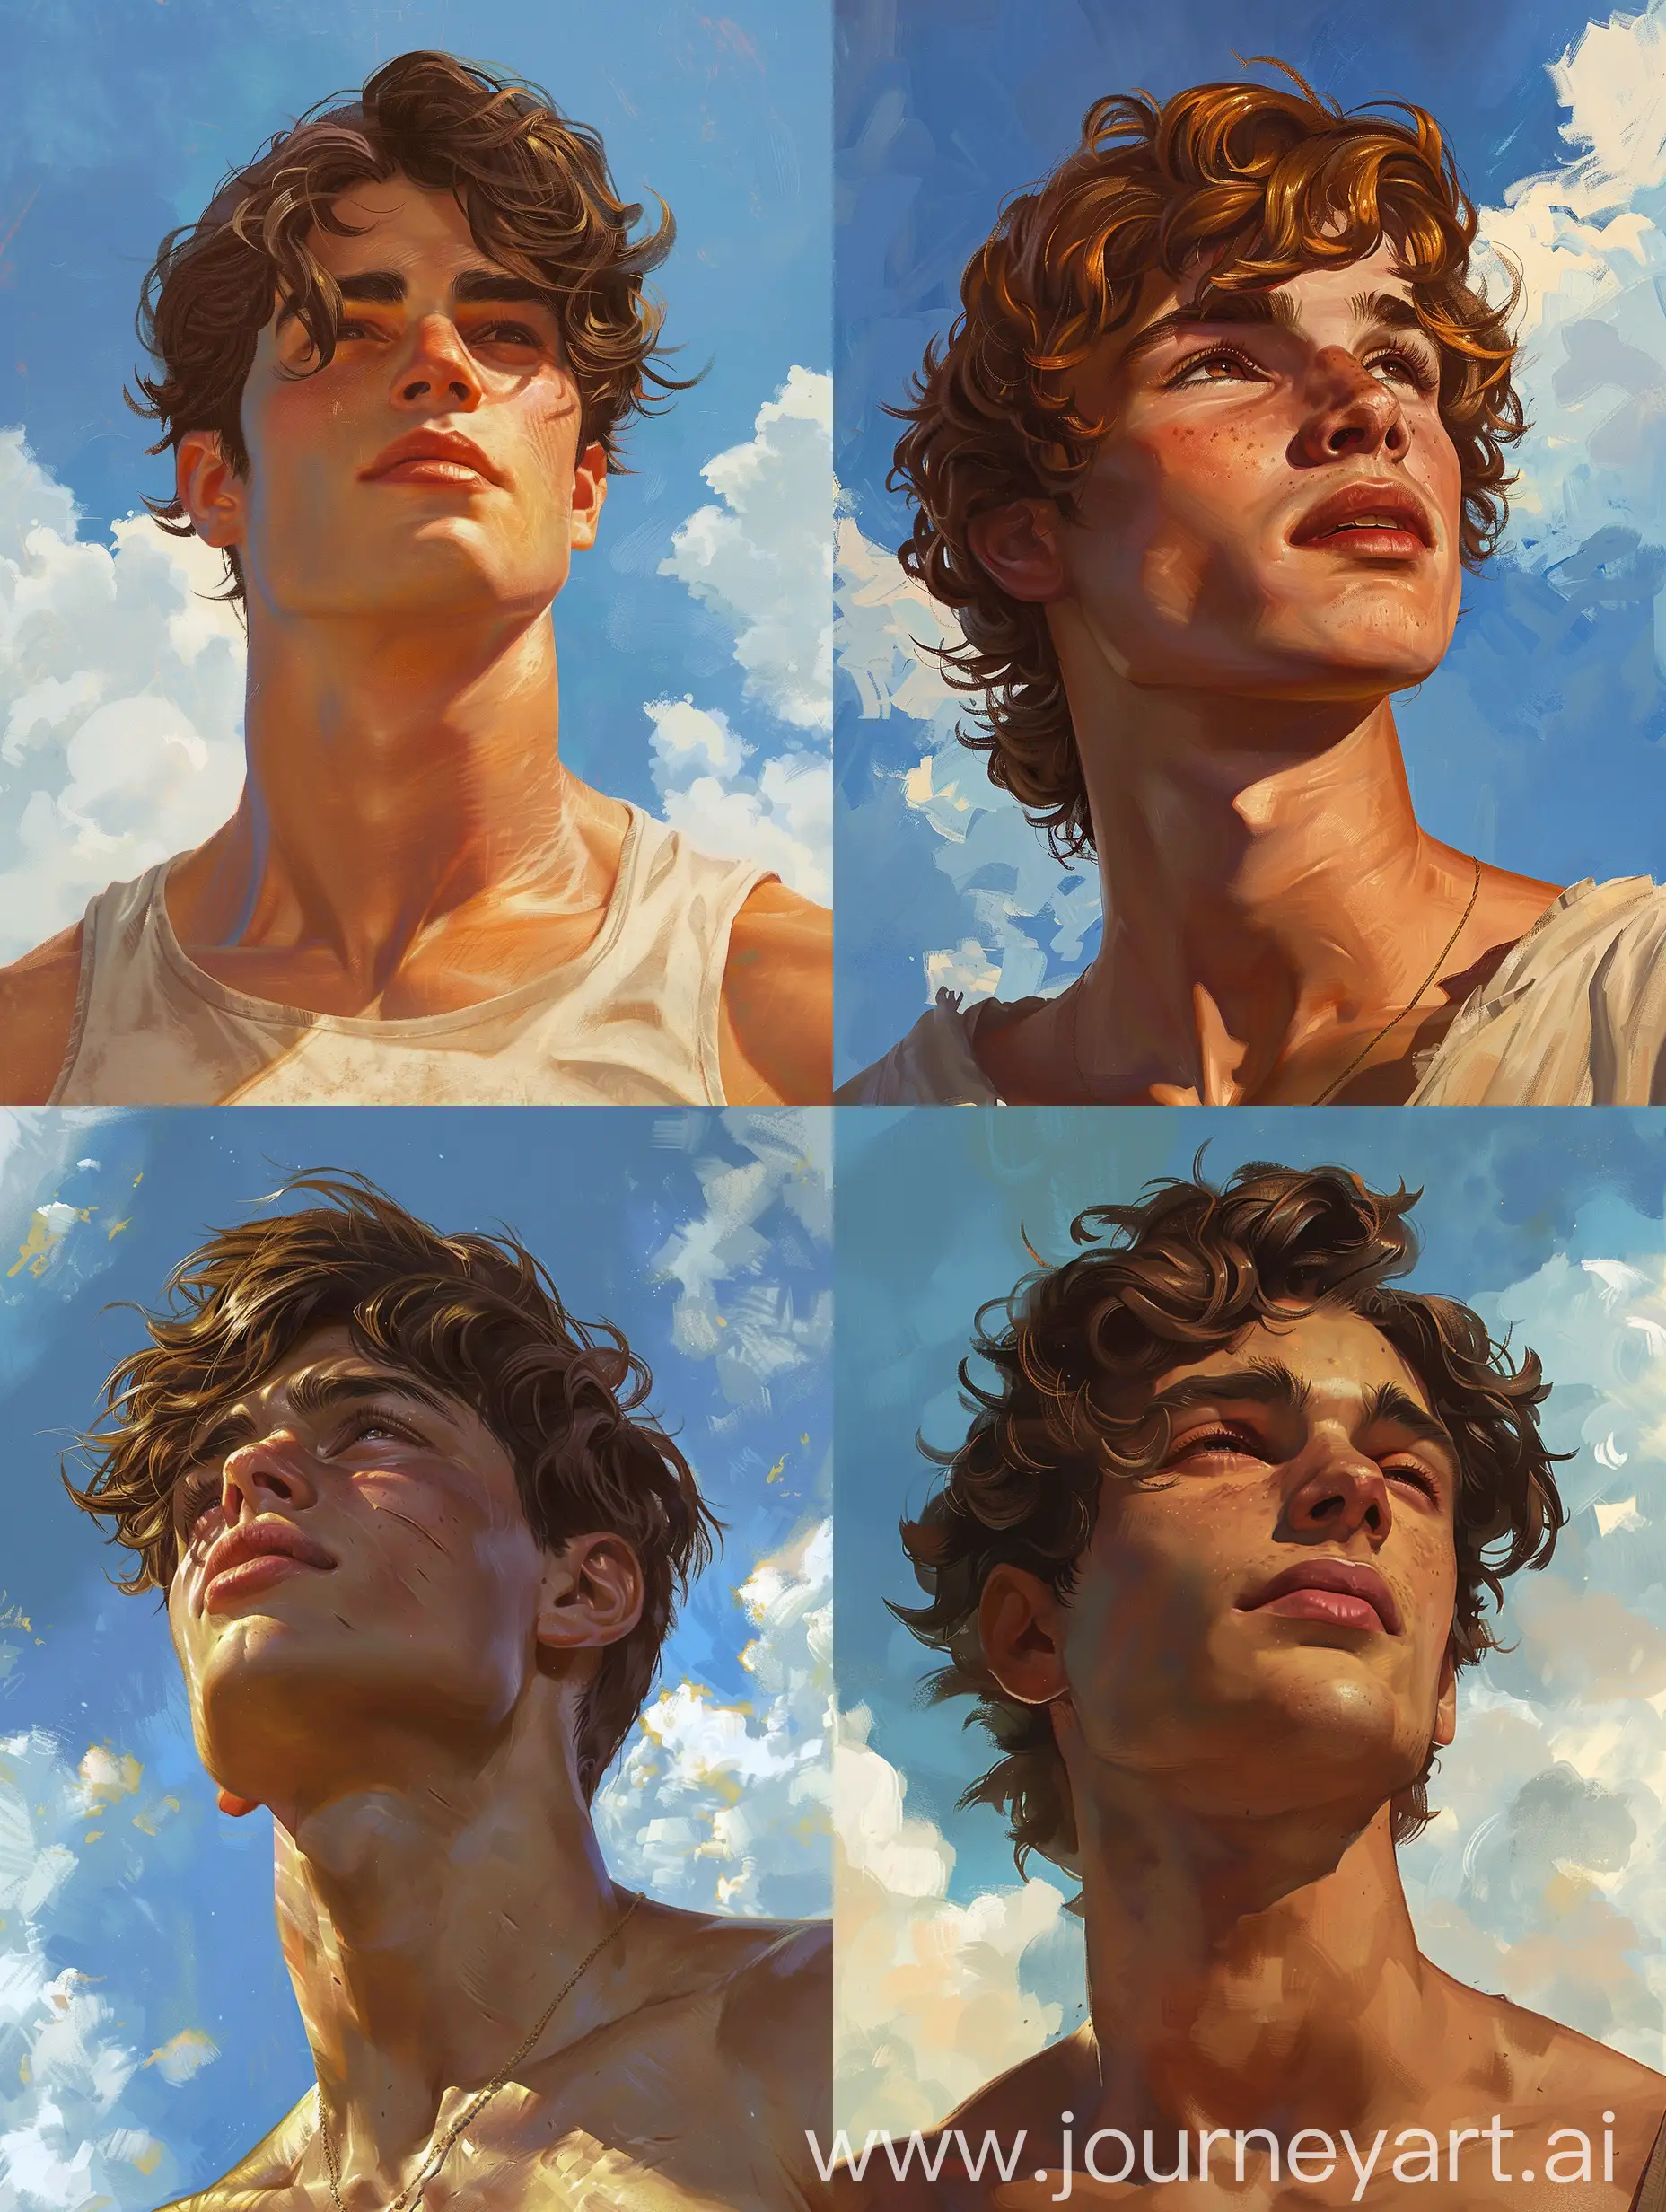 Young-Demigod-with-Golden-Brown-Hair-and-Muscular-Build-under-the-Open-Sky